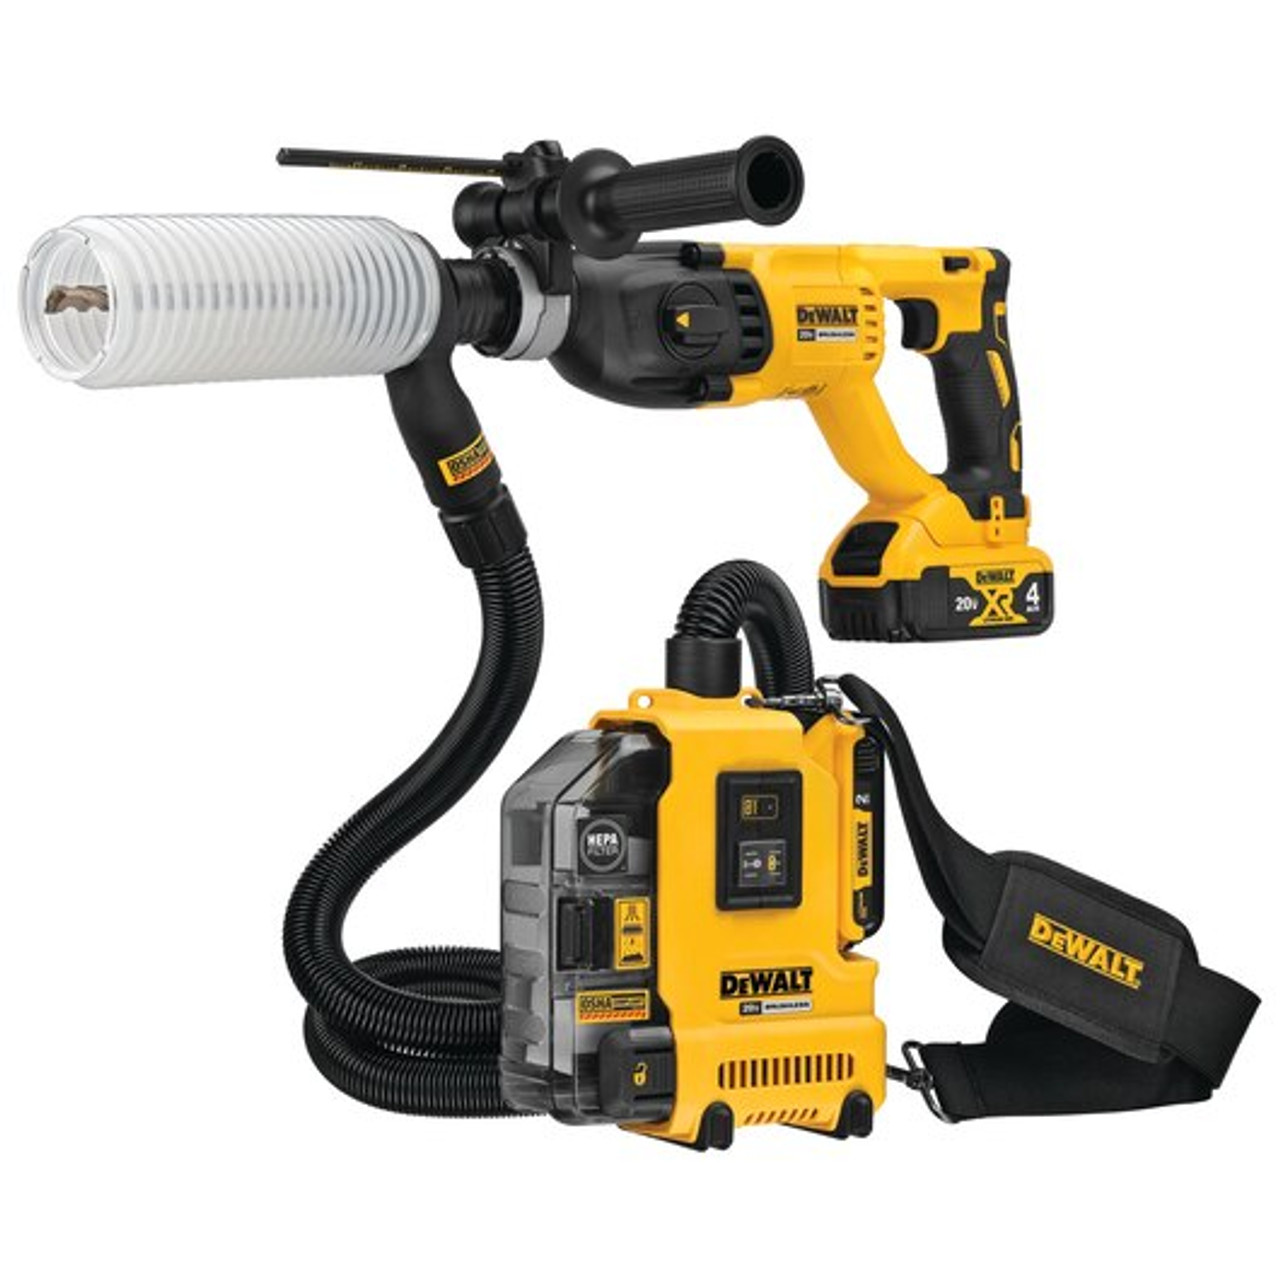 DEWALT DEW-DWH161D1 20V MAX Brushless Compact Universal Dust Extractor  2.0Ah Kit Atlas-Machinery